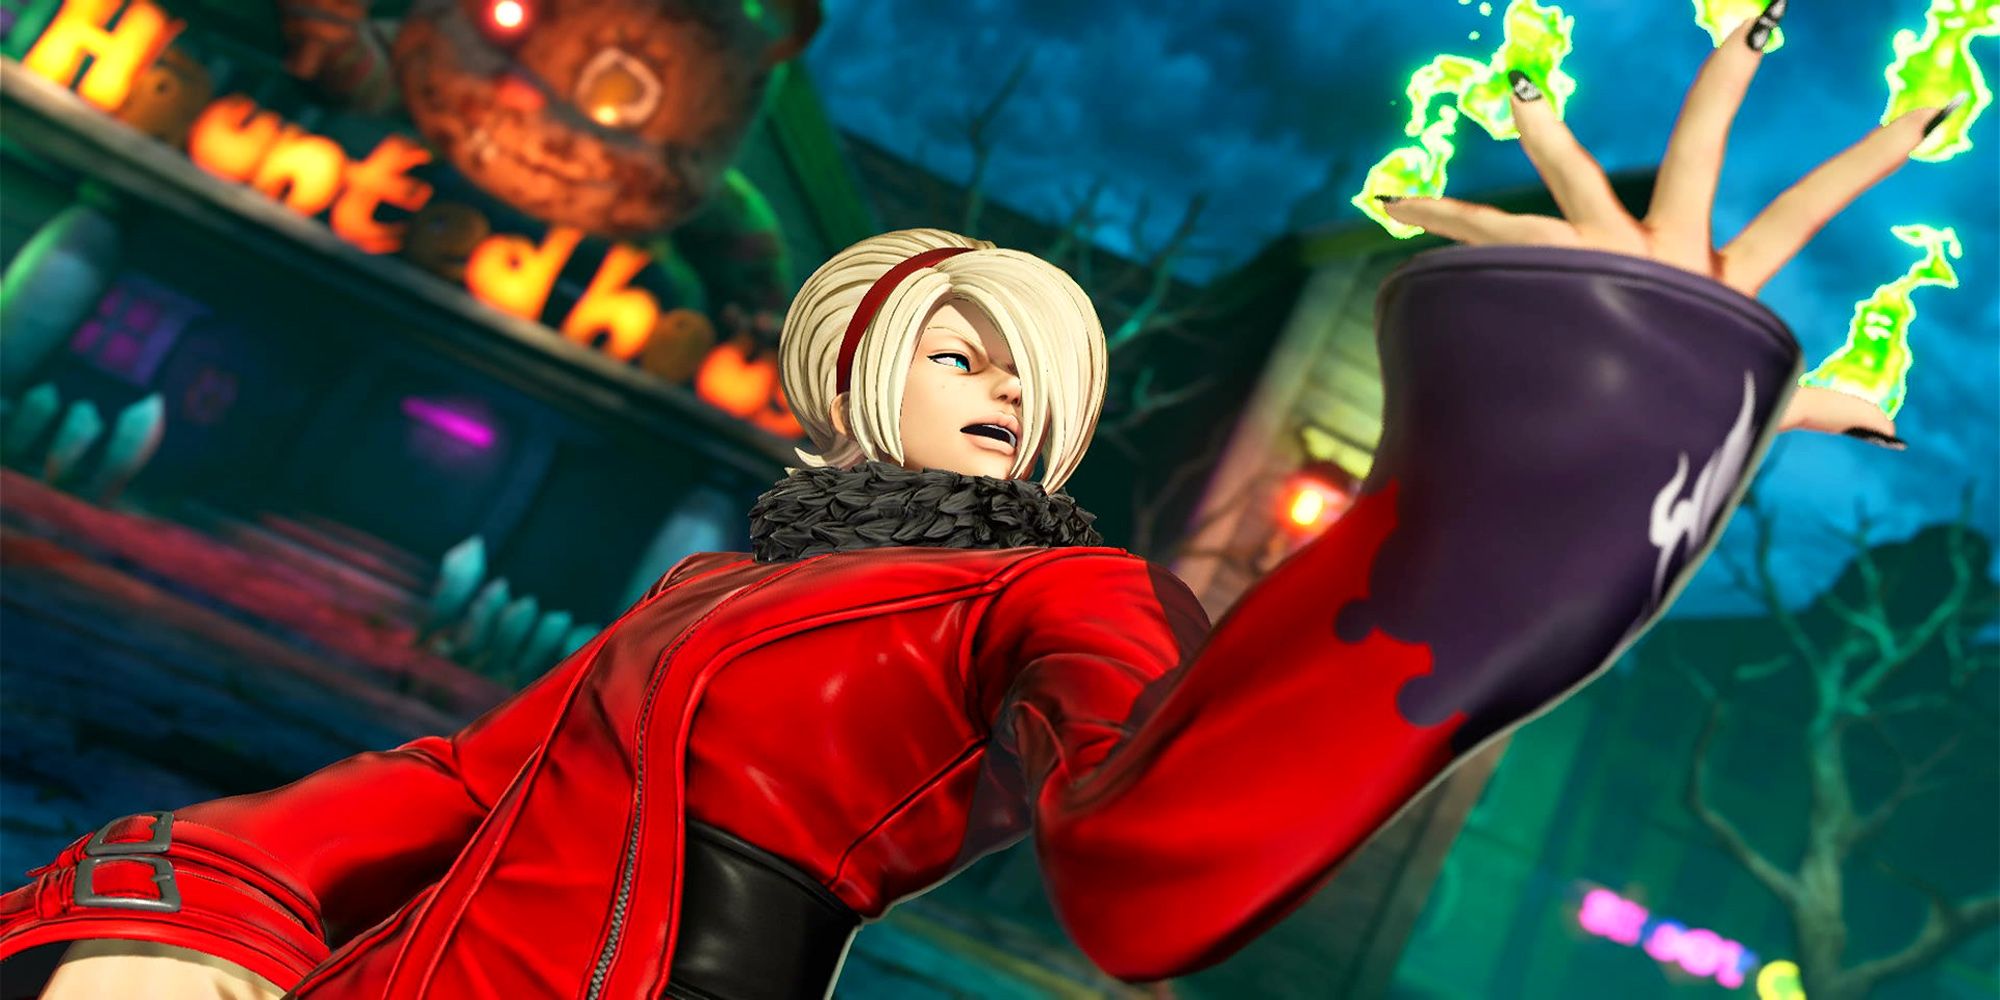 Ash Crimson prepares to launch his Climax Super Special move, Espoir, towards an opponent at the Abandoned Theme Park. The King Of Fighters 15.